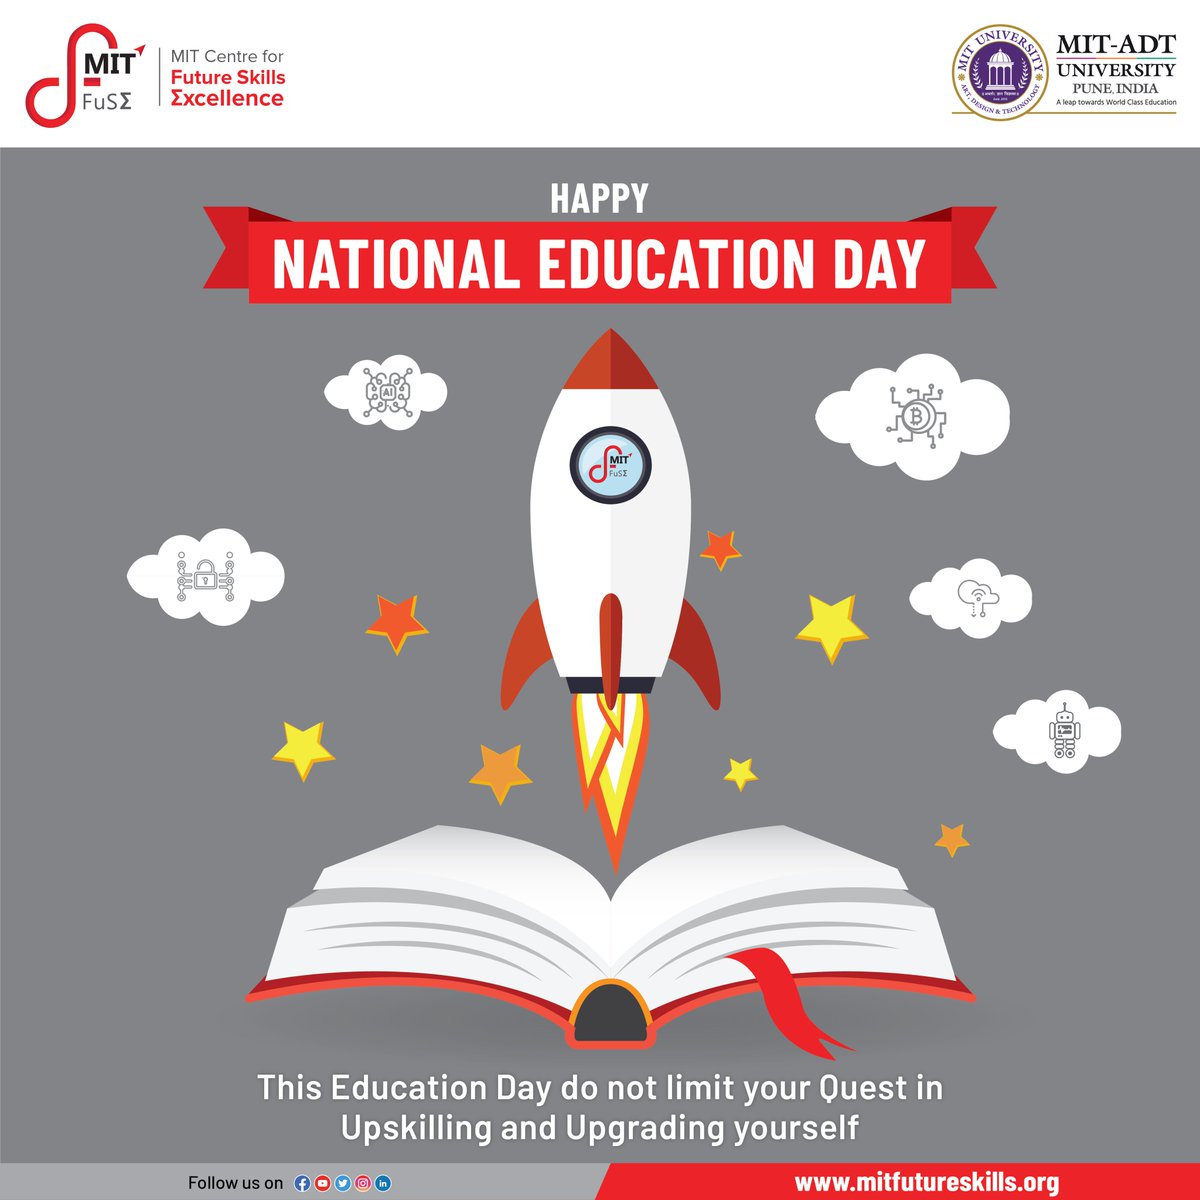 MIT Centre for Future Skills Excellence wishes you a Happy National Education Day! 

#nationaleducationday #education #technology #digital #future #BeFutureReady #BoostYourCareer #innovation #digitallearning #MITADT #MITFutureSkills #MITFuSE